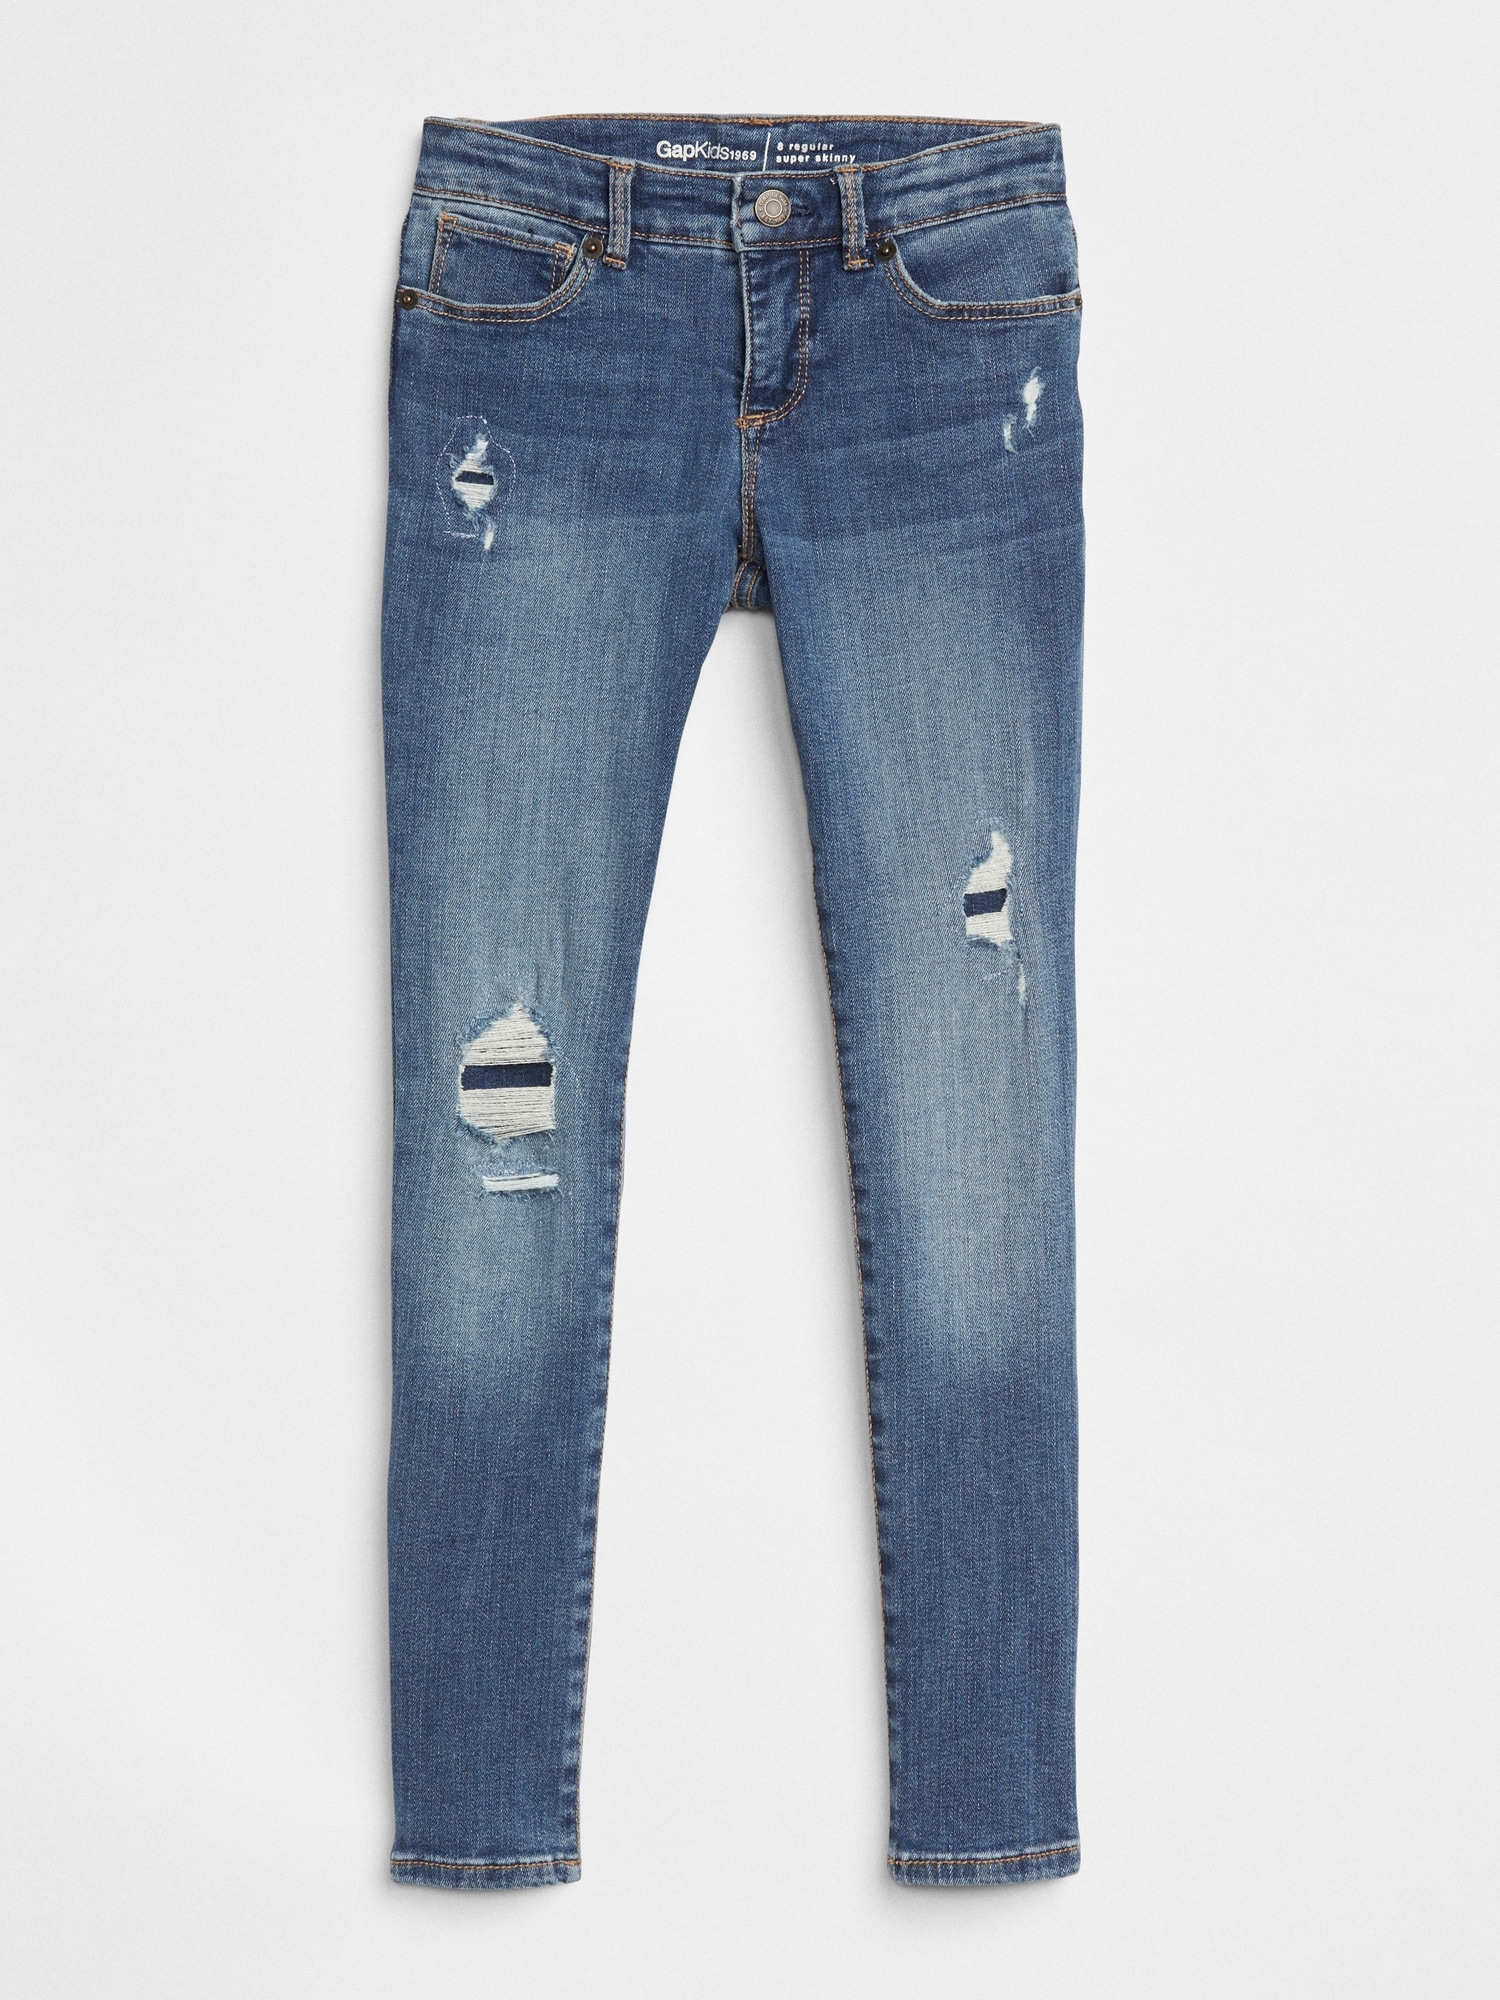 chicos embroidered jeans